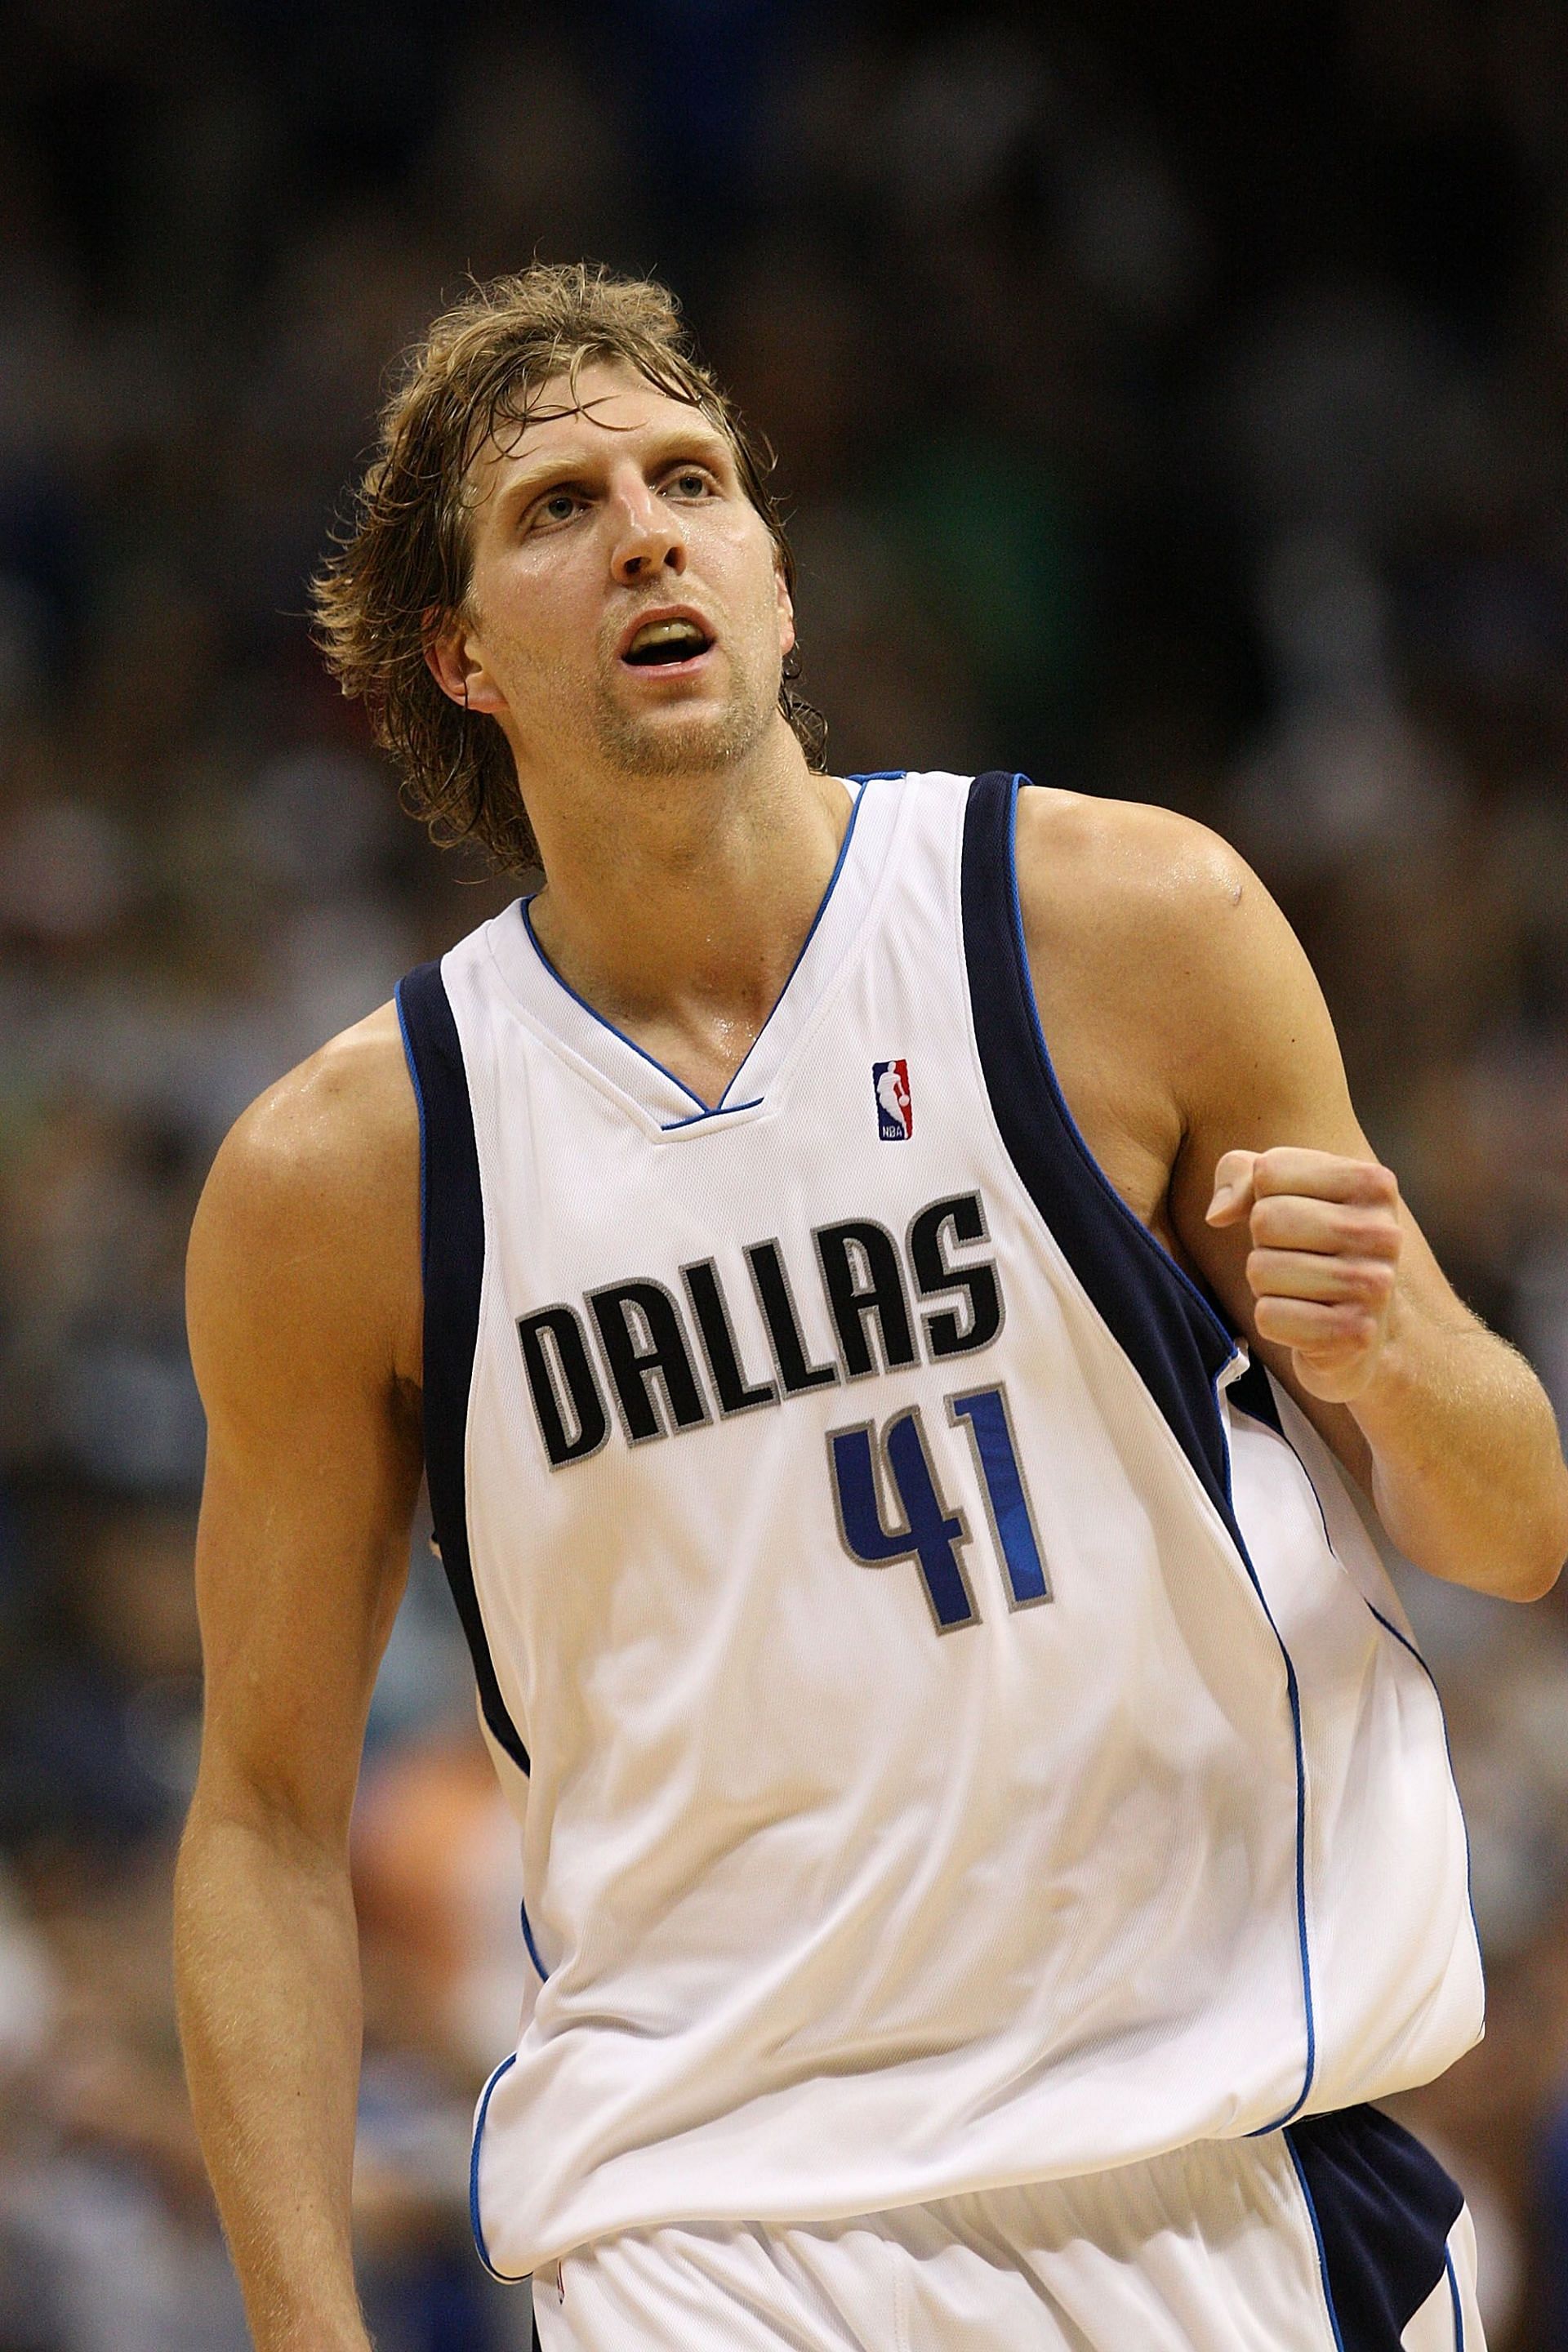 Where Does Dirk Nowitzki Fit Among the Greatest European Players